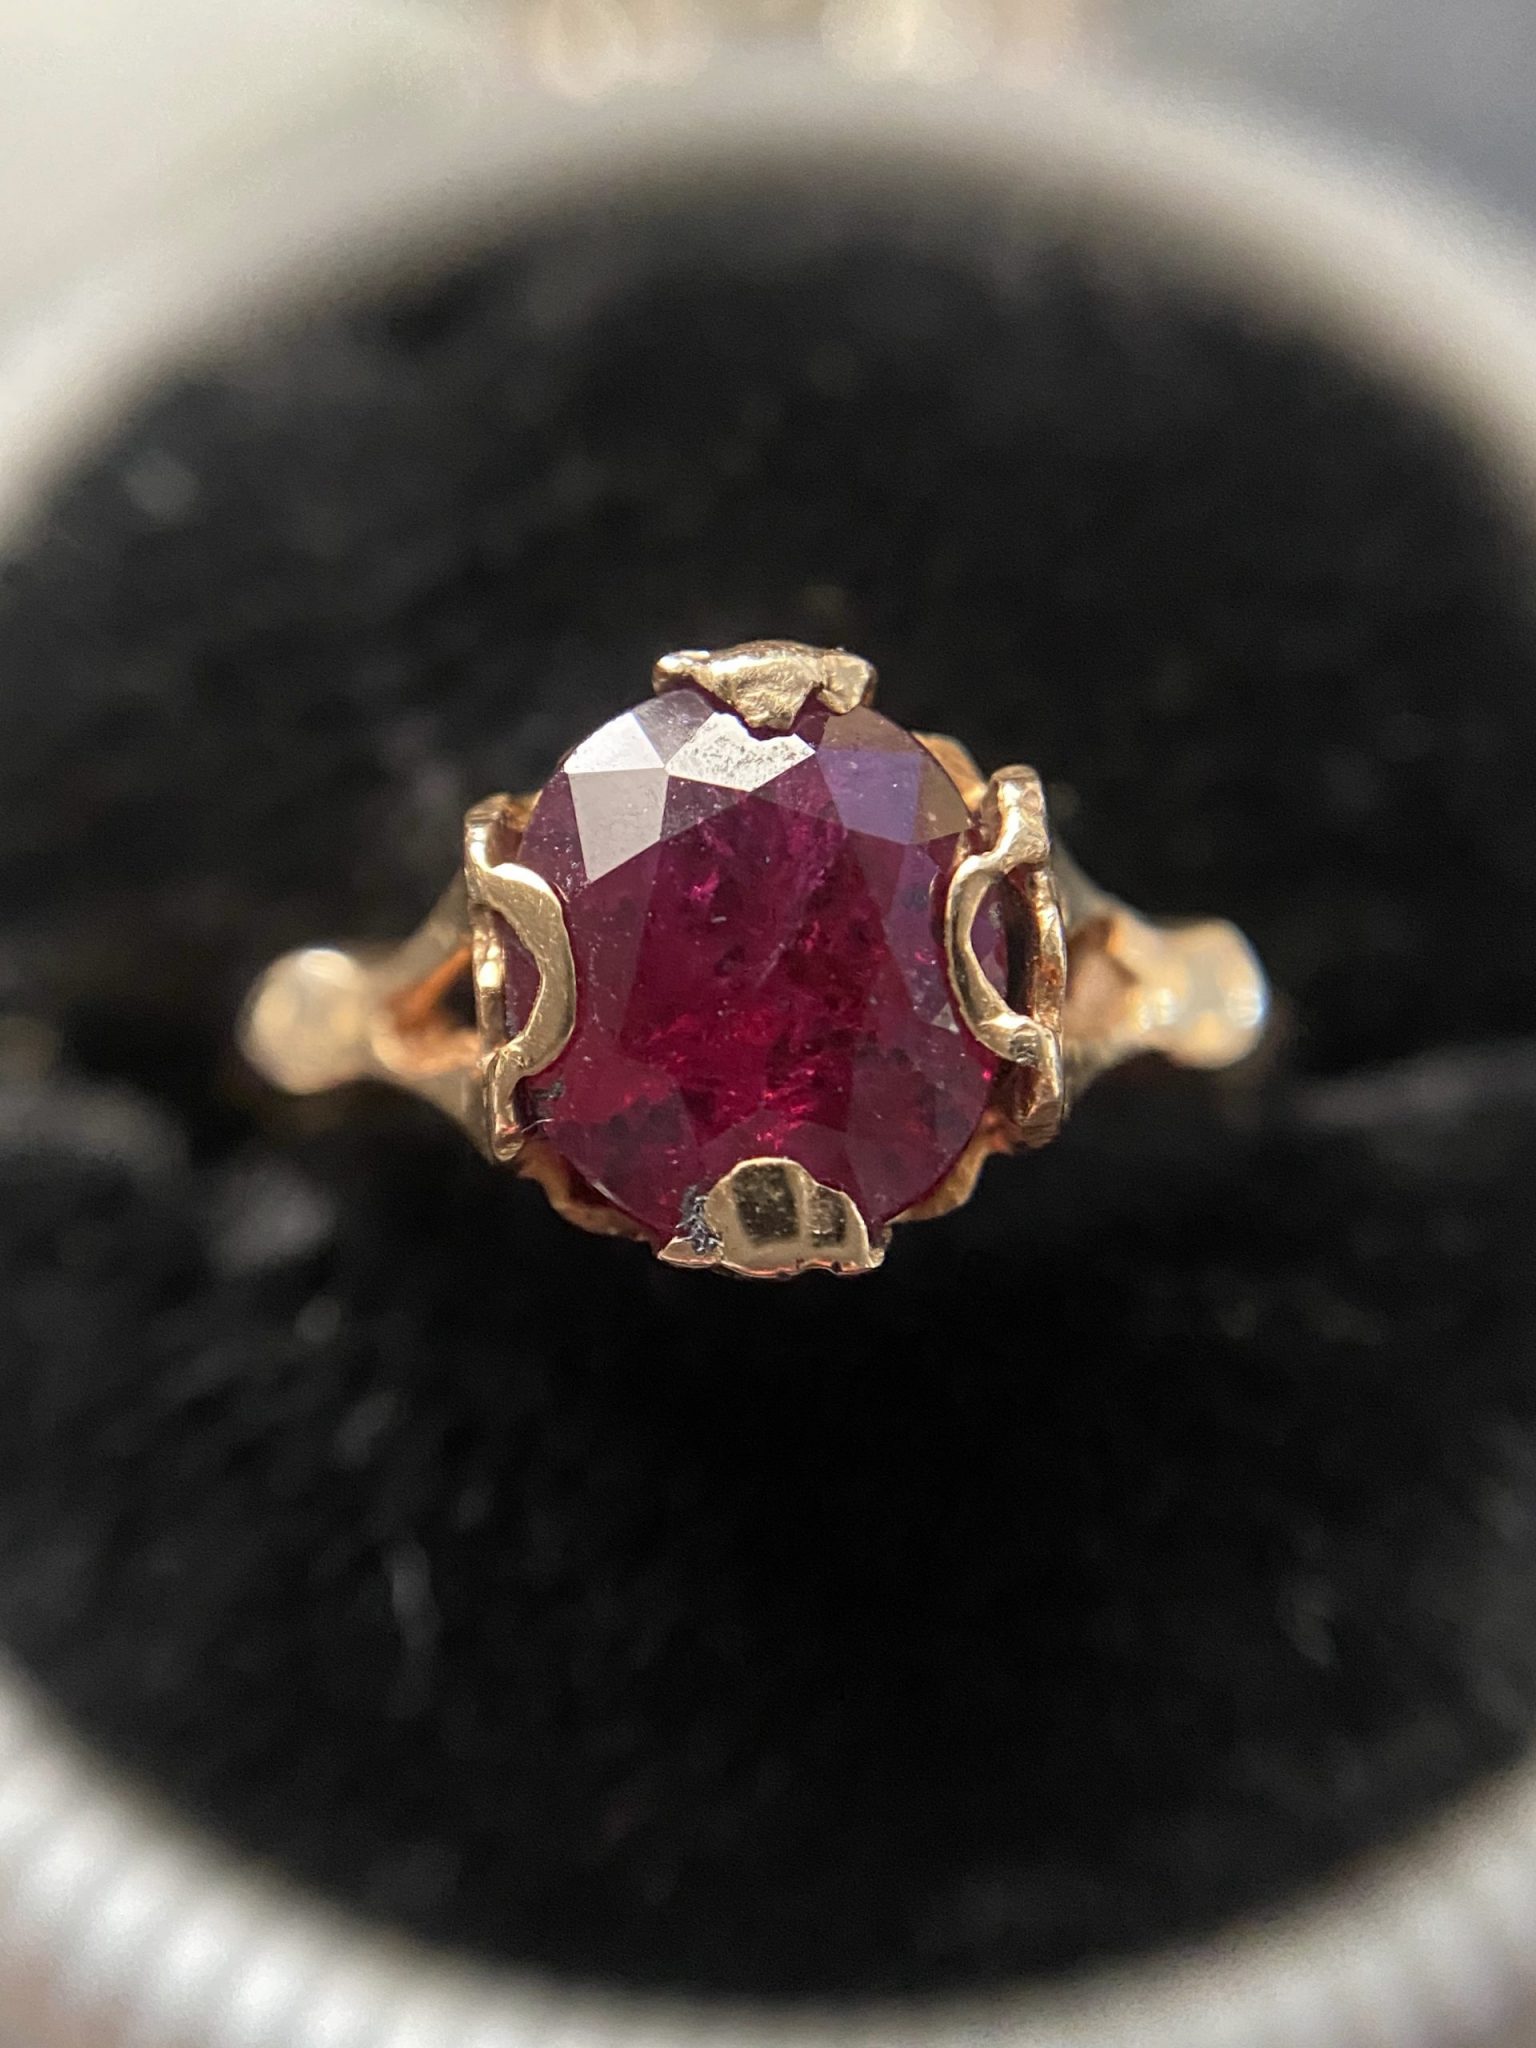 Vintage Ruby Solitaire Ring